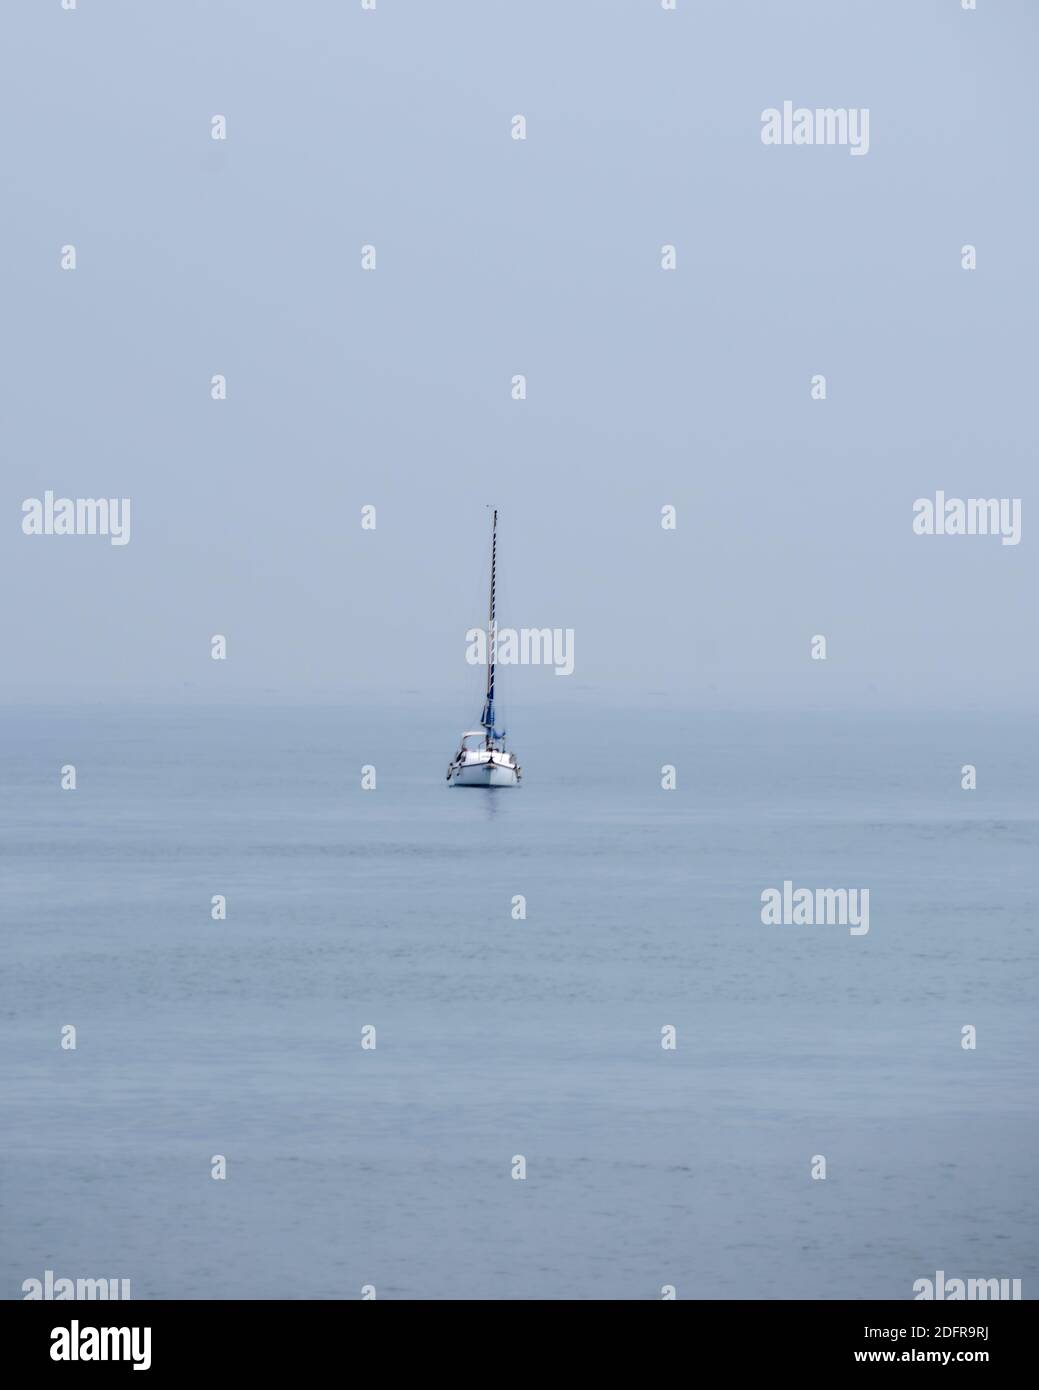 Sailboat in the ocean on cloudy day, no horizon, isolated, no contrast Stock Photo